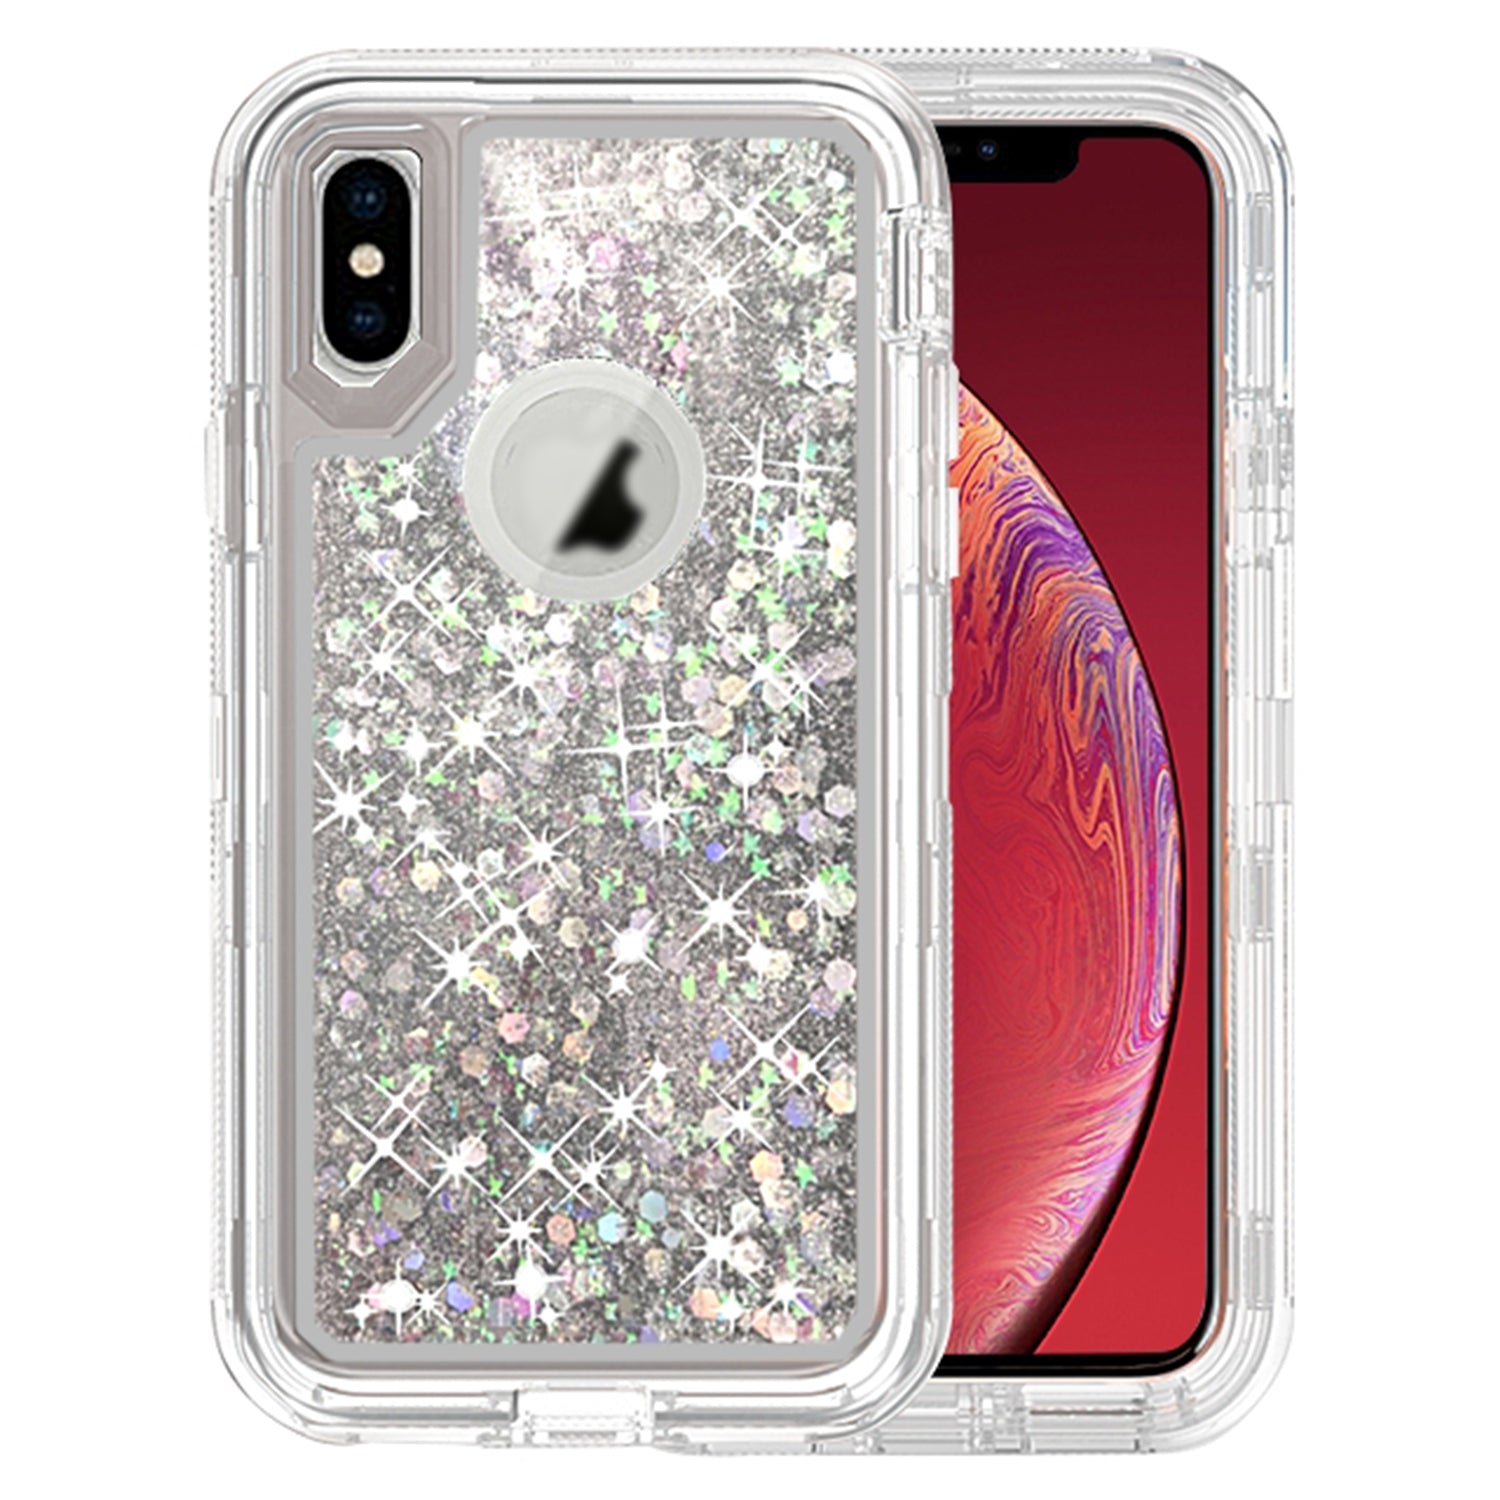 Transparent Floating Glitter Heavy Duty Case for iPhone X/XS